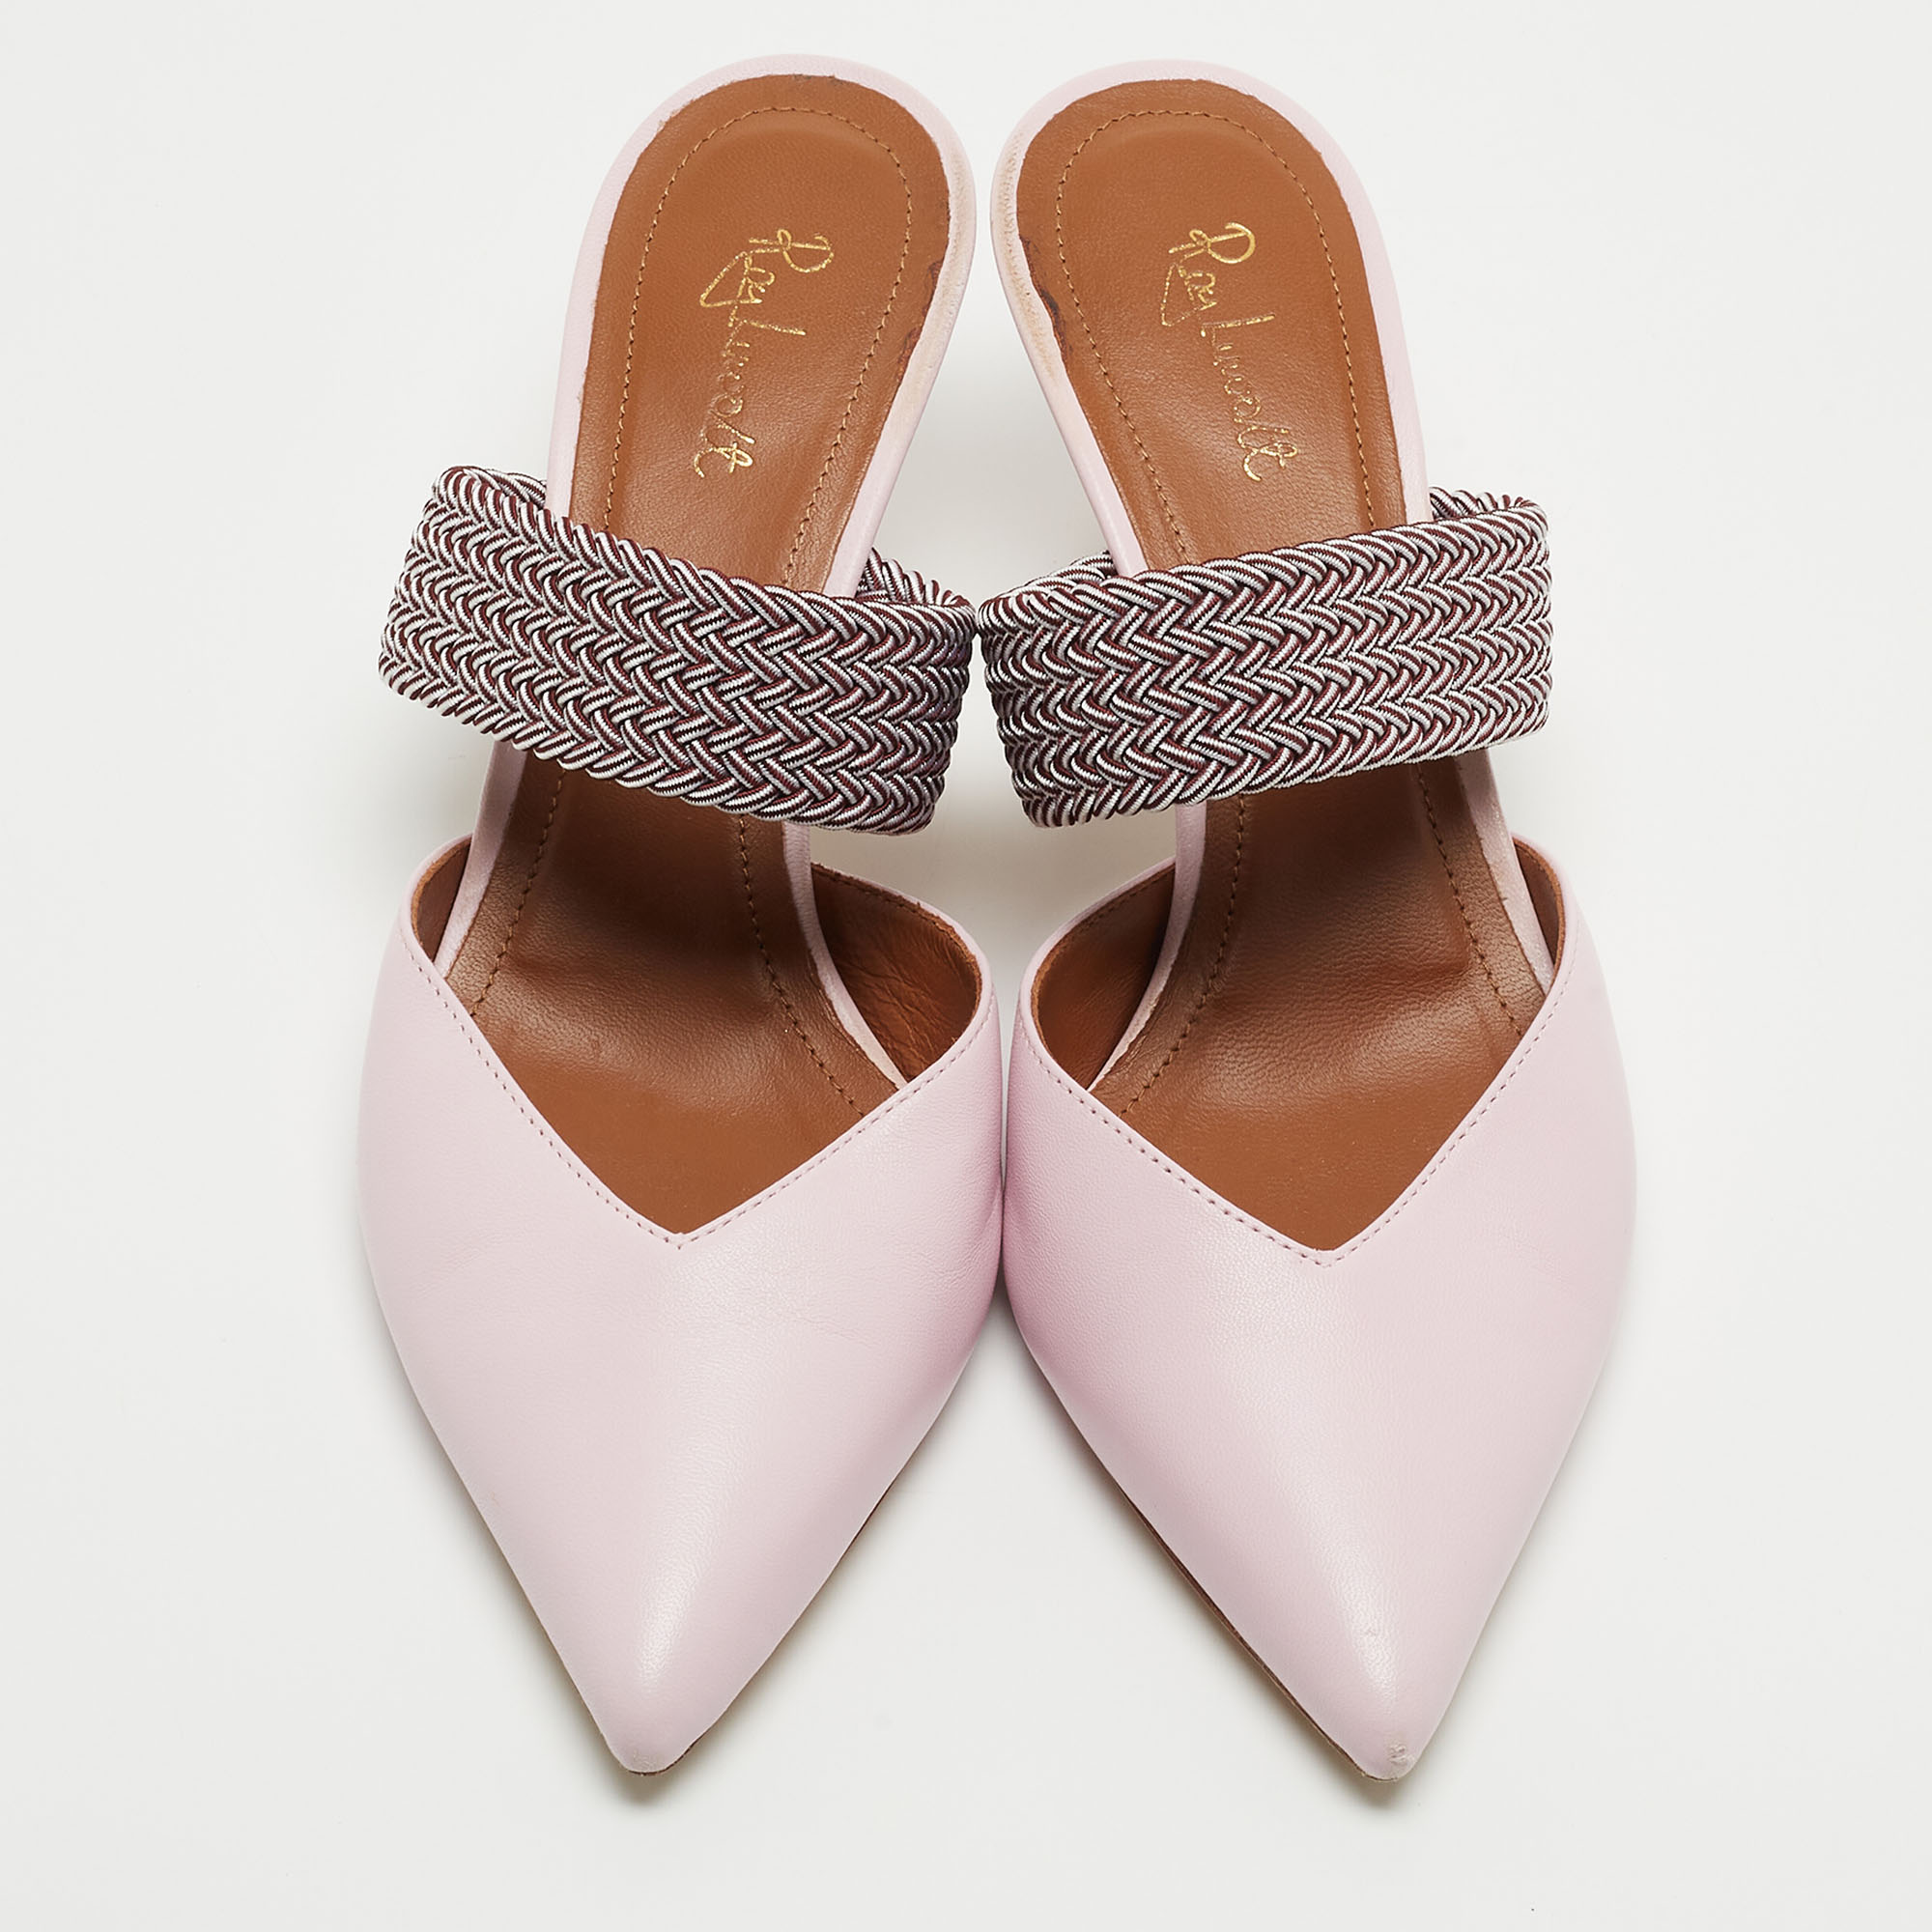 Malone Souliers X Ray Luwolt Pink Leather Maisie Mules Size 38